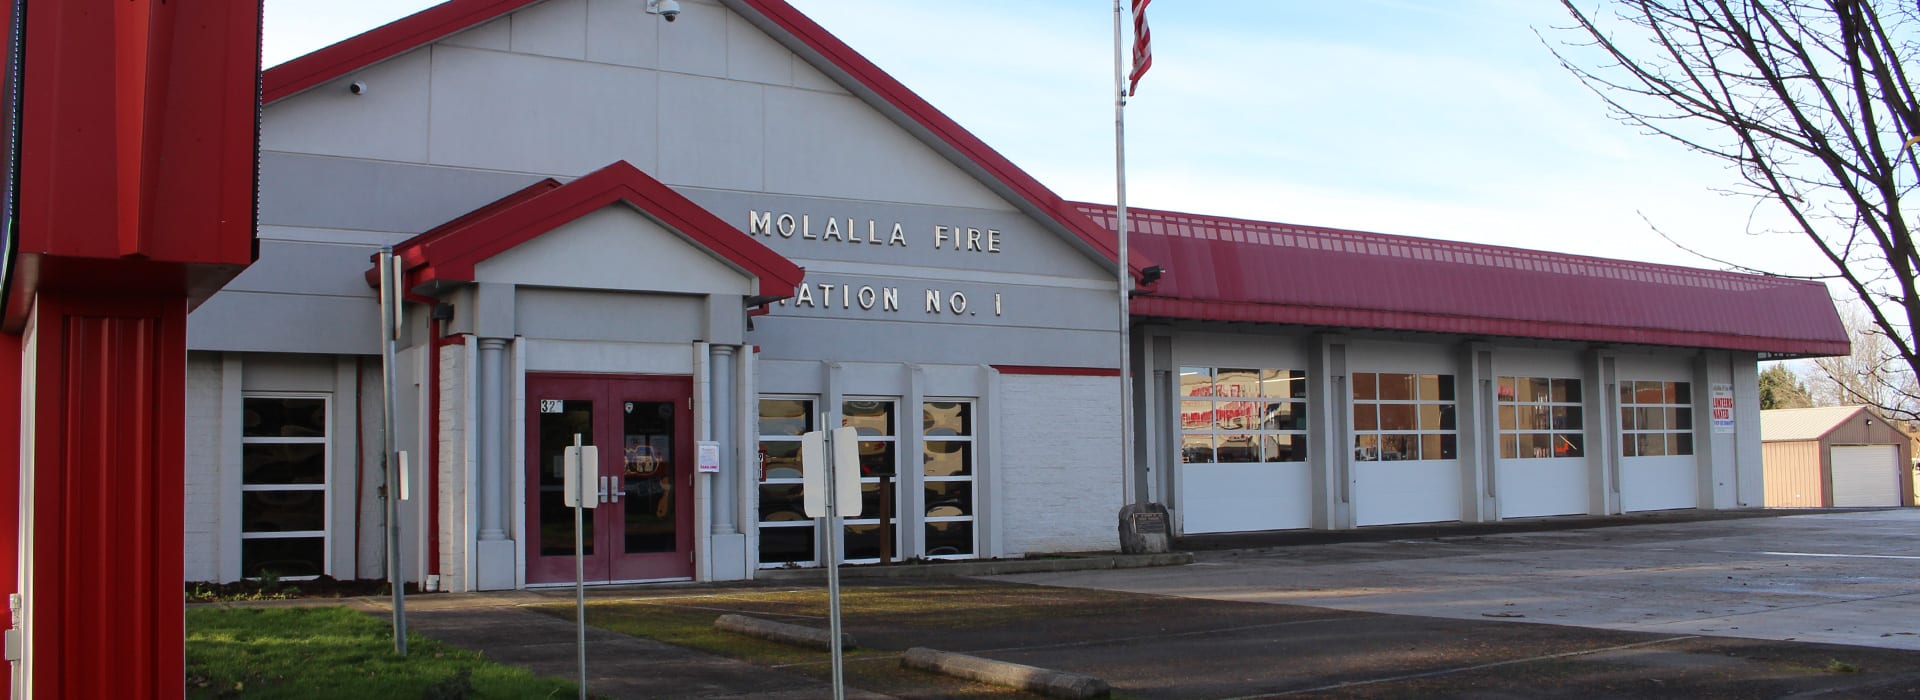 Exterior picture of the Molalla main fire station